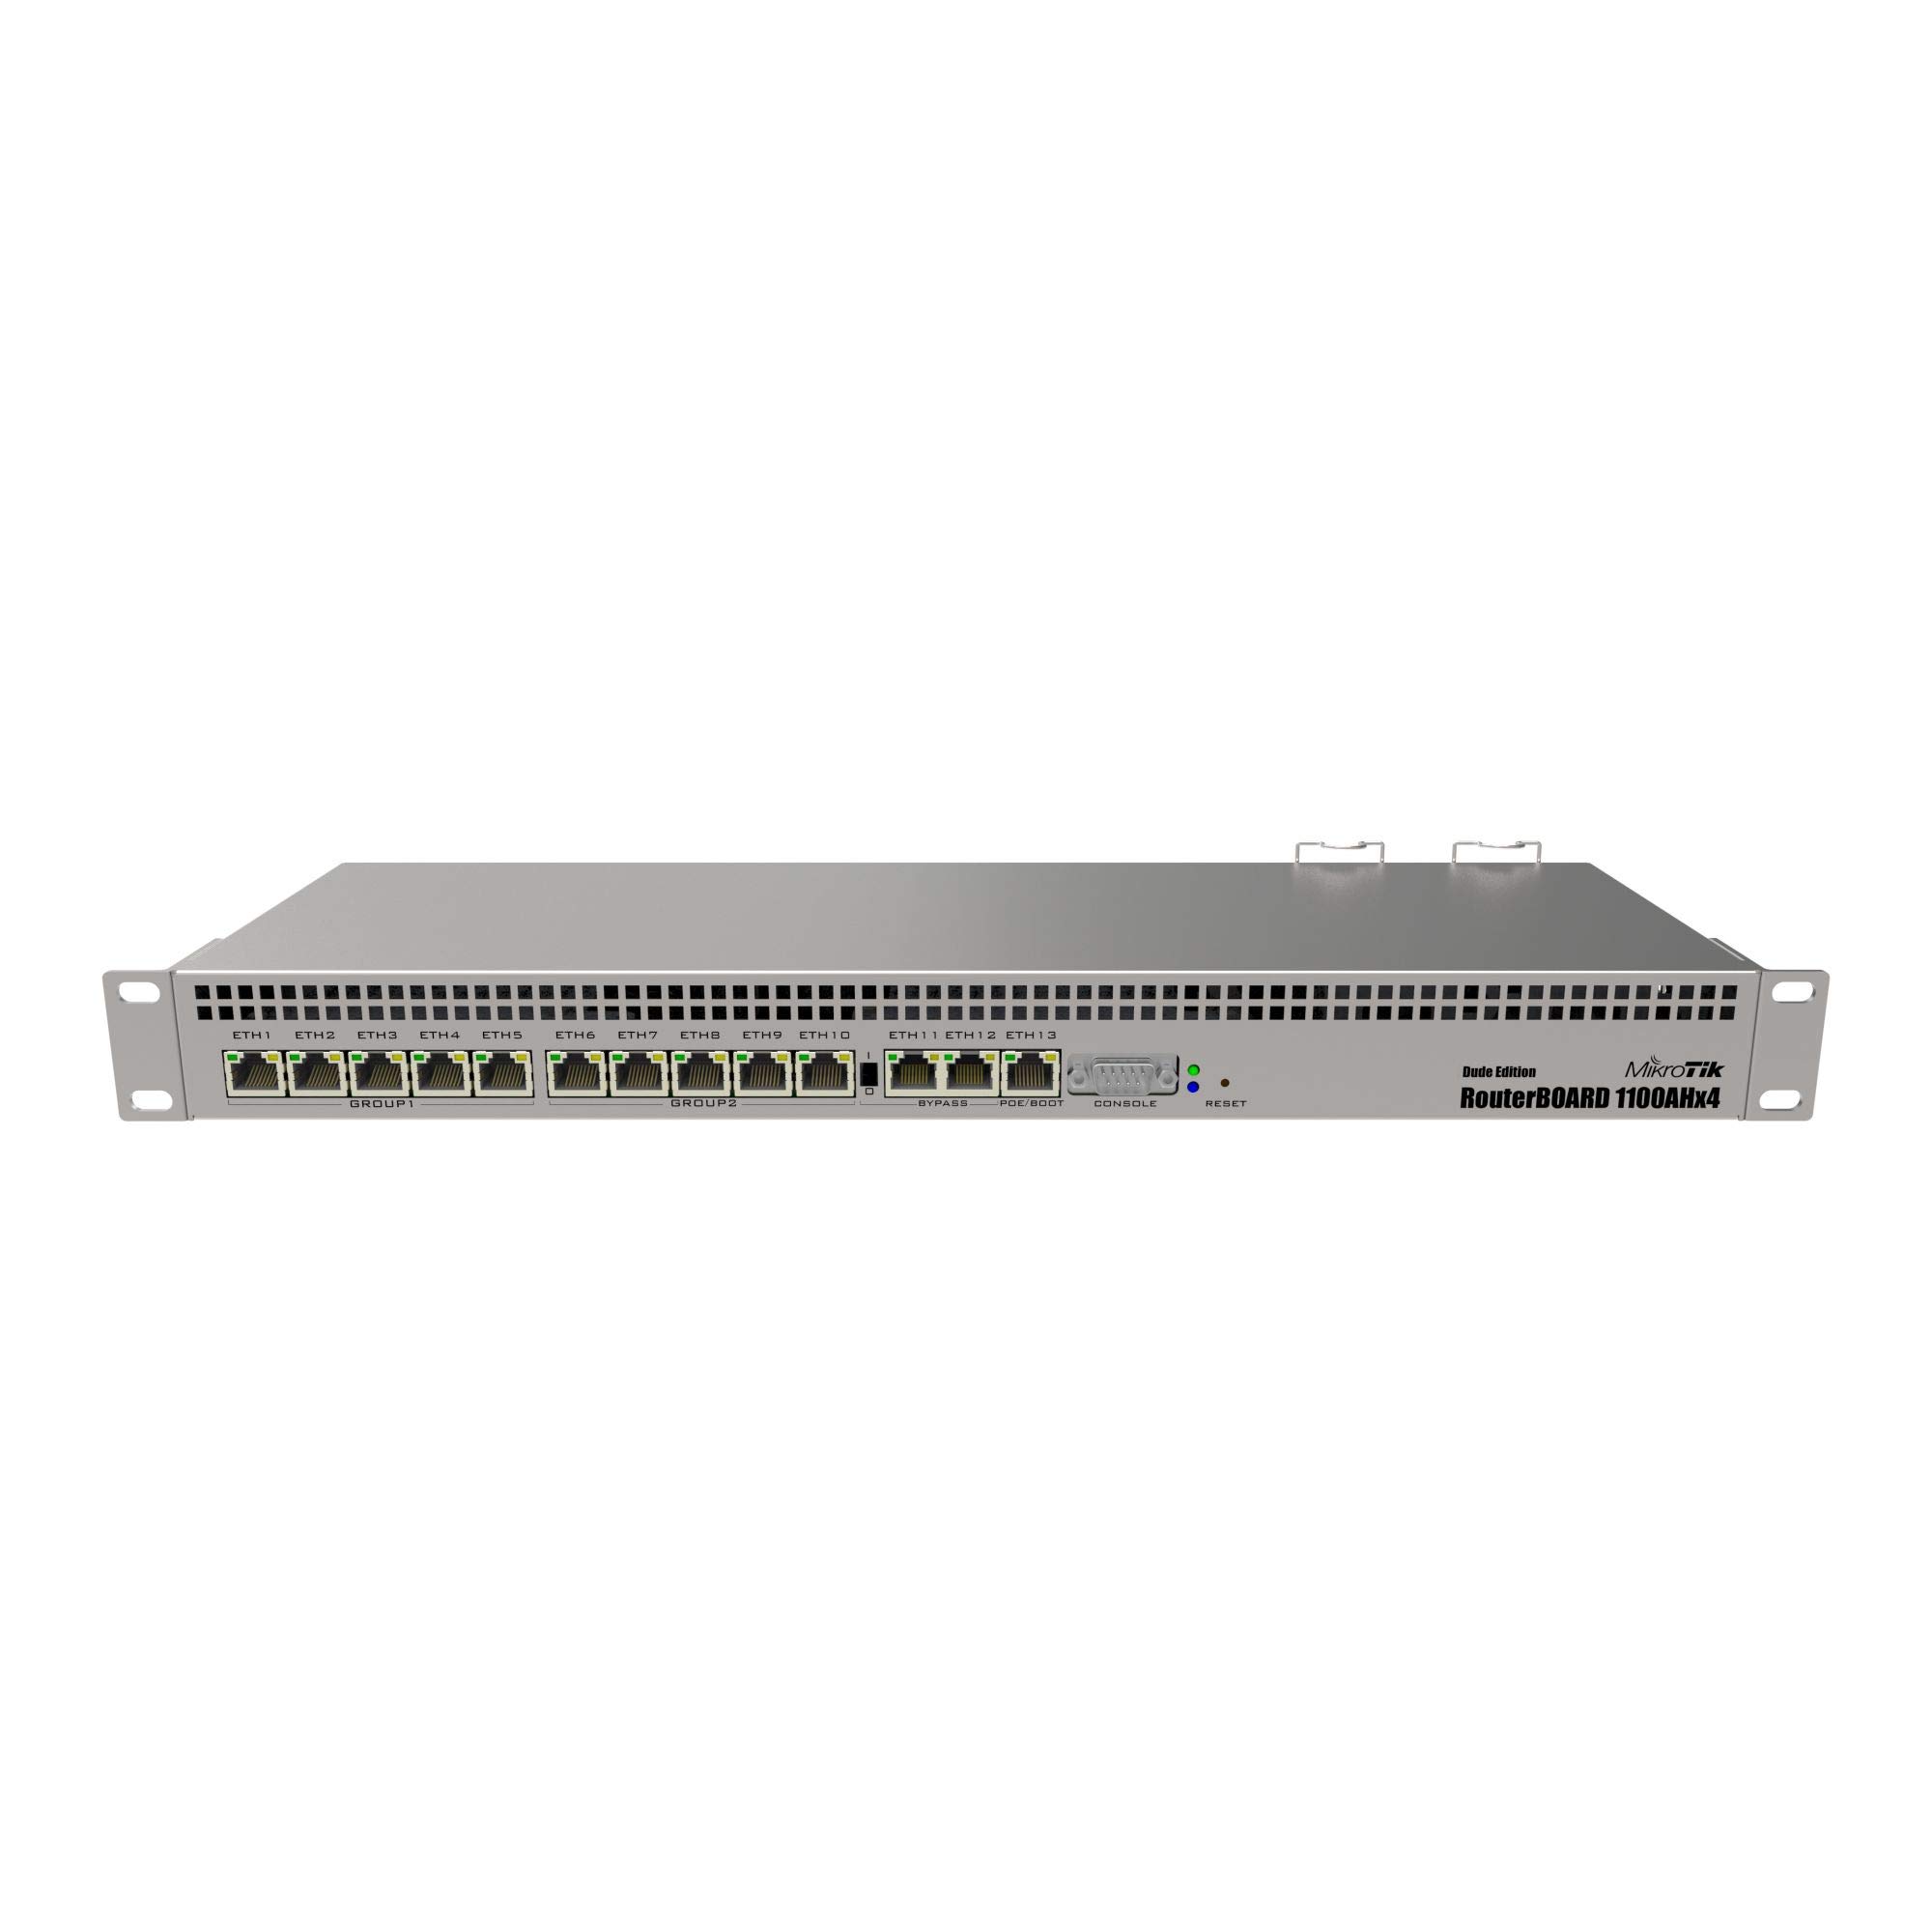 MikroTik RouterBOARD 1100AHx4 Dude Edition with 13 Gigabit Ethernet Ports, RS232 Serial Port and Dual Redundant Power Supplies (RB1100AHx4)